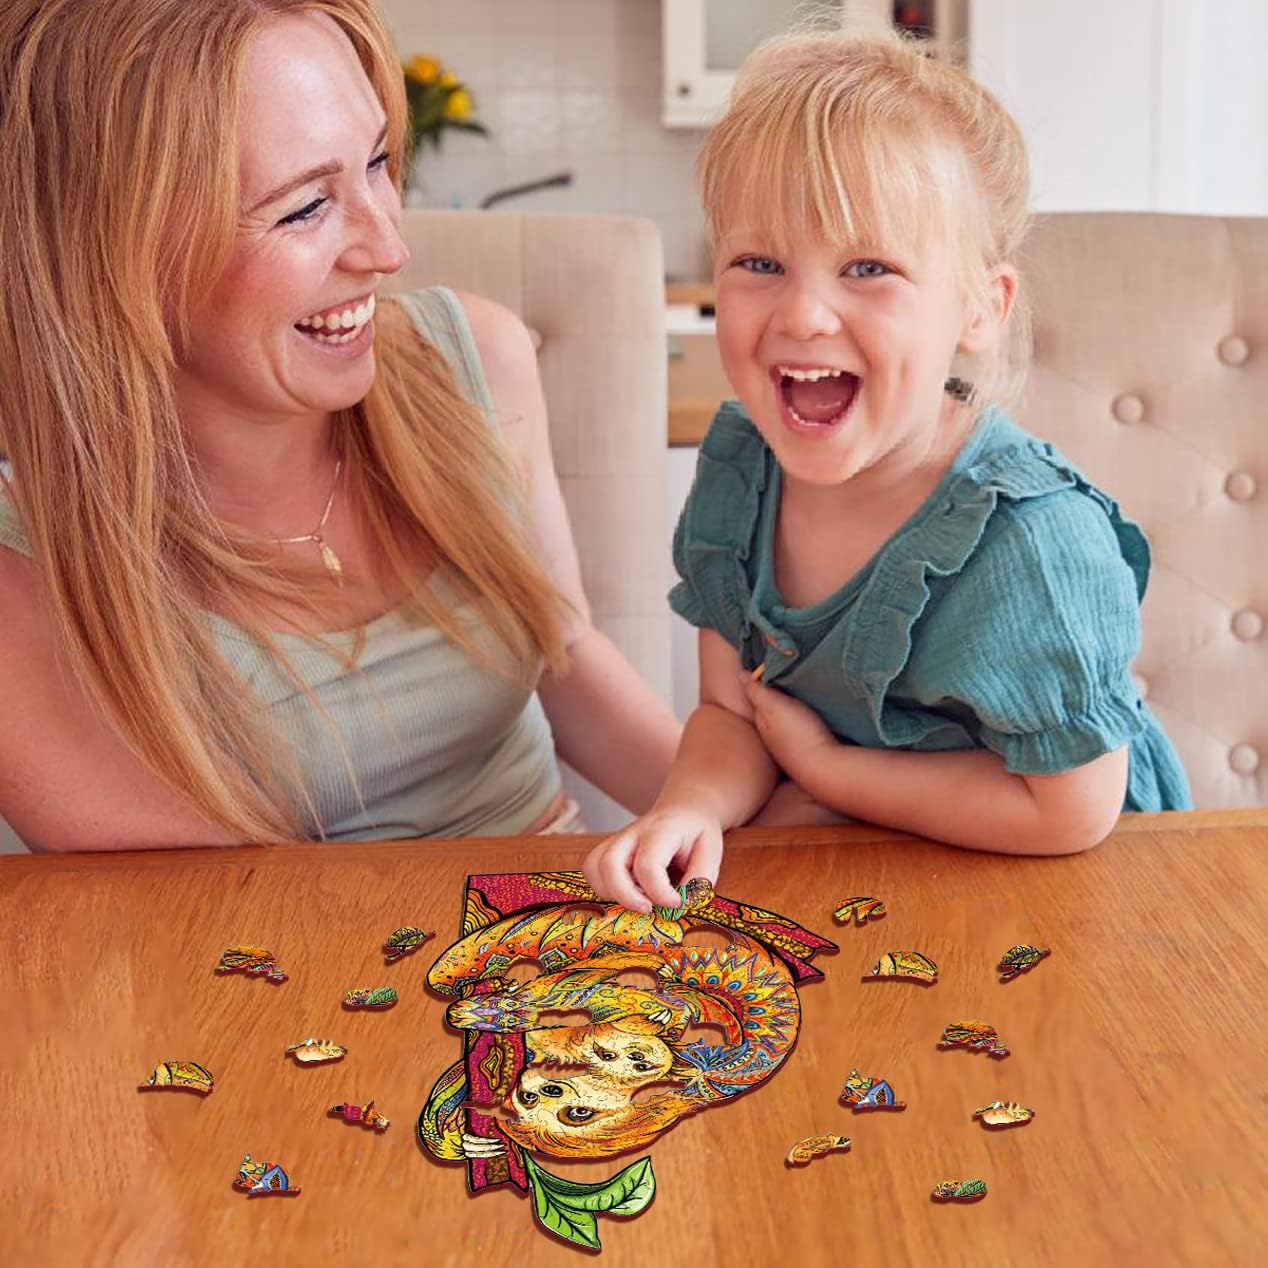 Sloth Wooden Puzzle for Adults, 218 Pieces Wood Cut Puzzles, Unique Animal Shape Puzzles, for Mom Kids Family (M-12.5x8.8in)